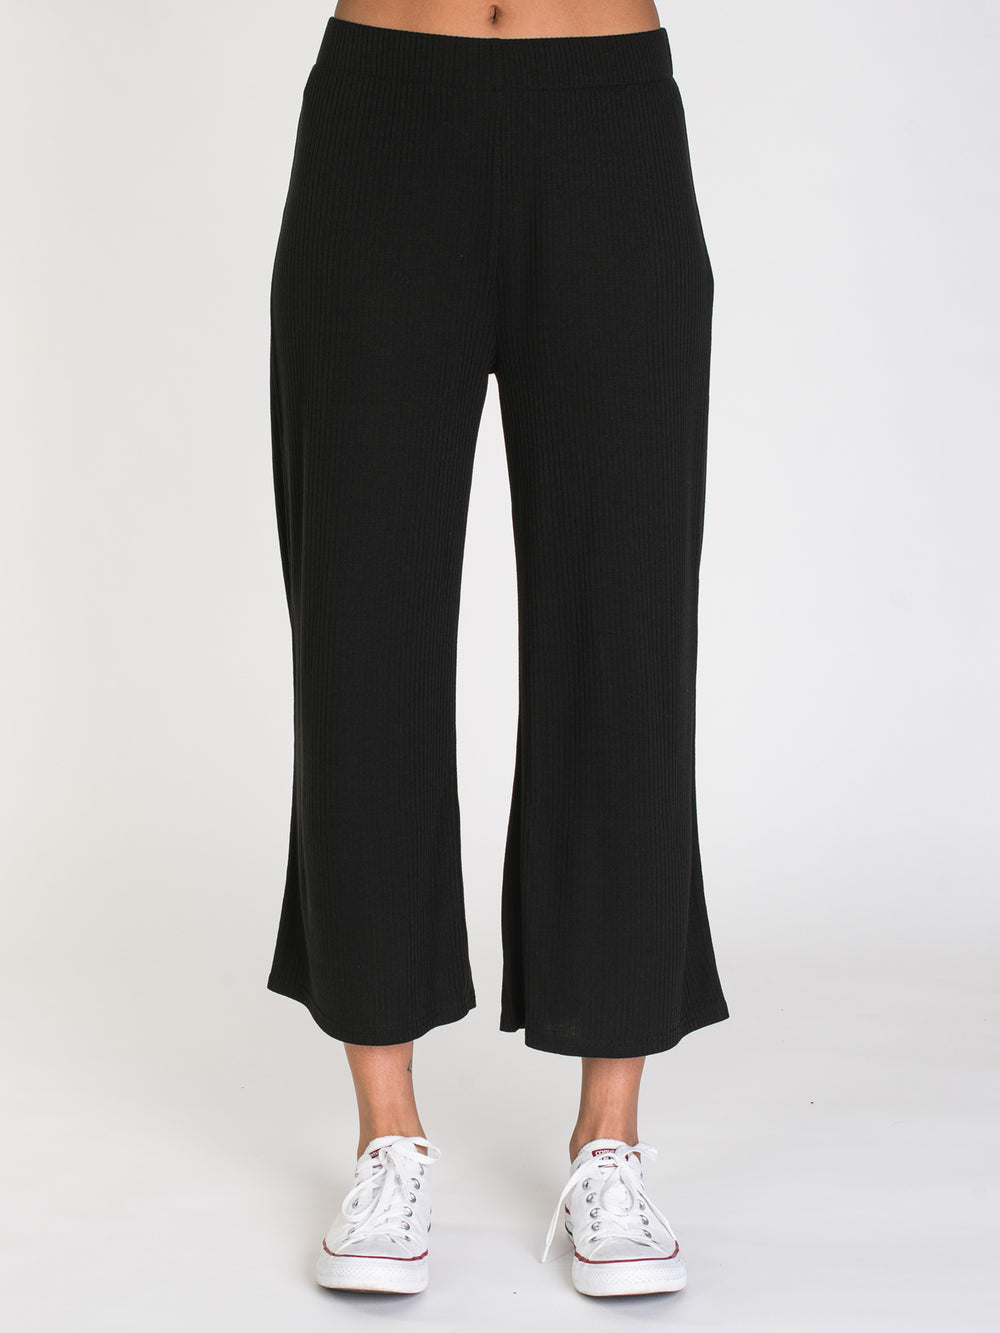 HARLOW BREANNA CROPPED KNIT PANT - CLEARANCE